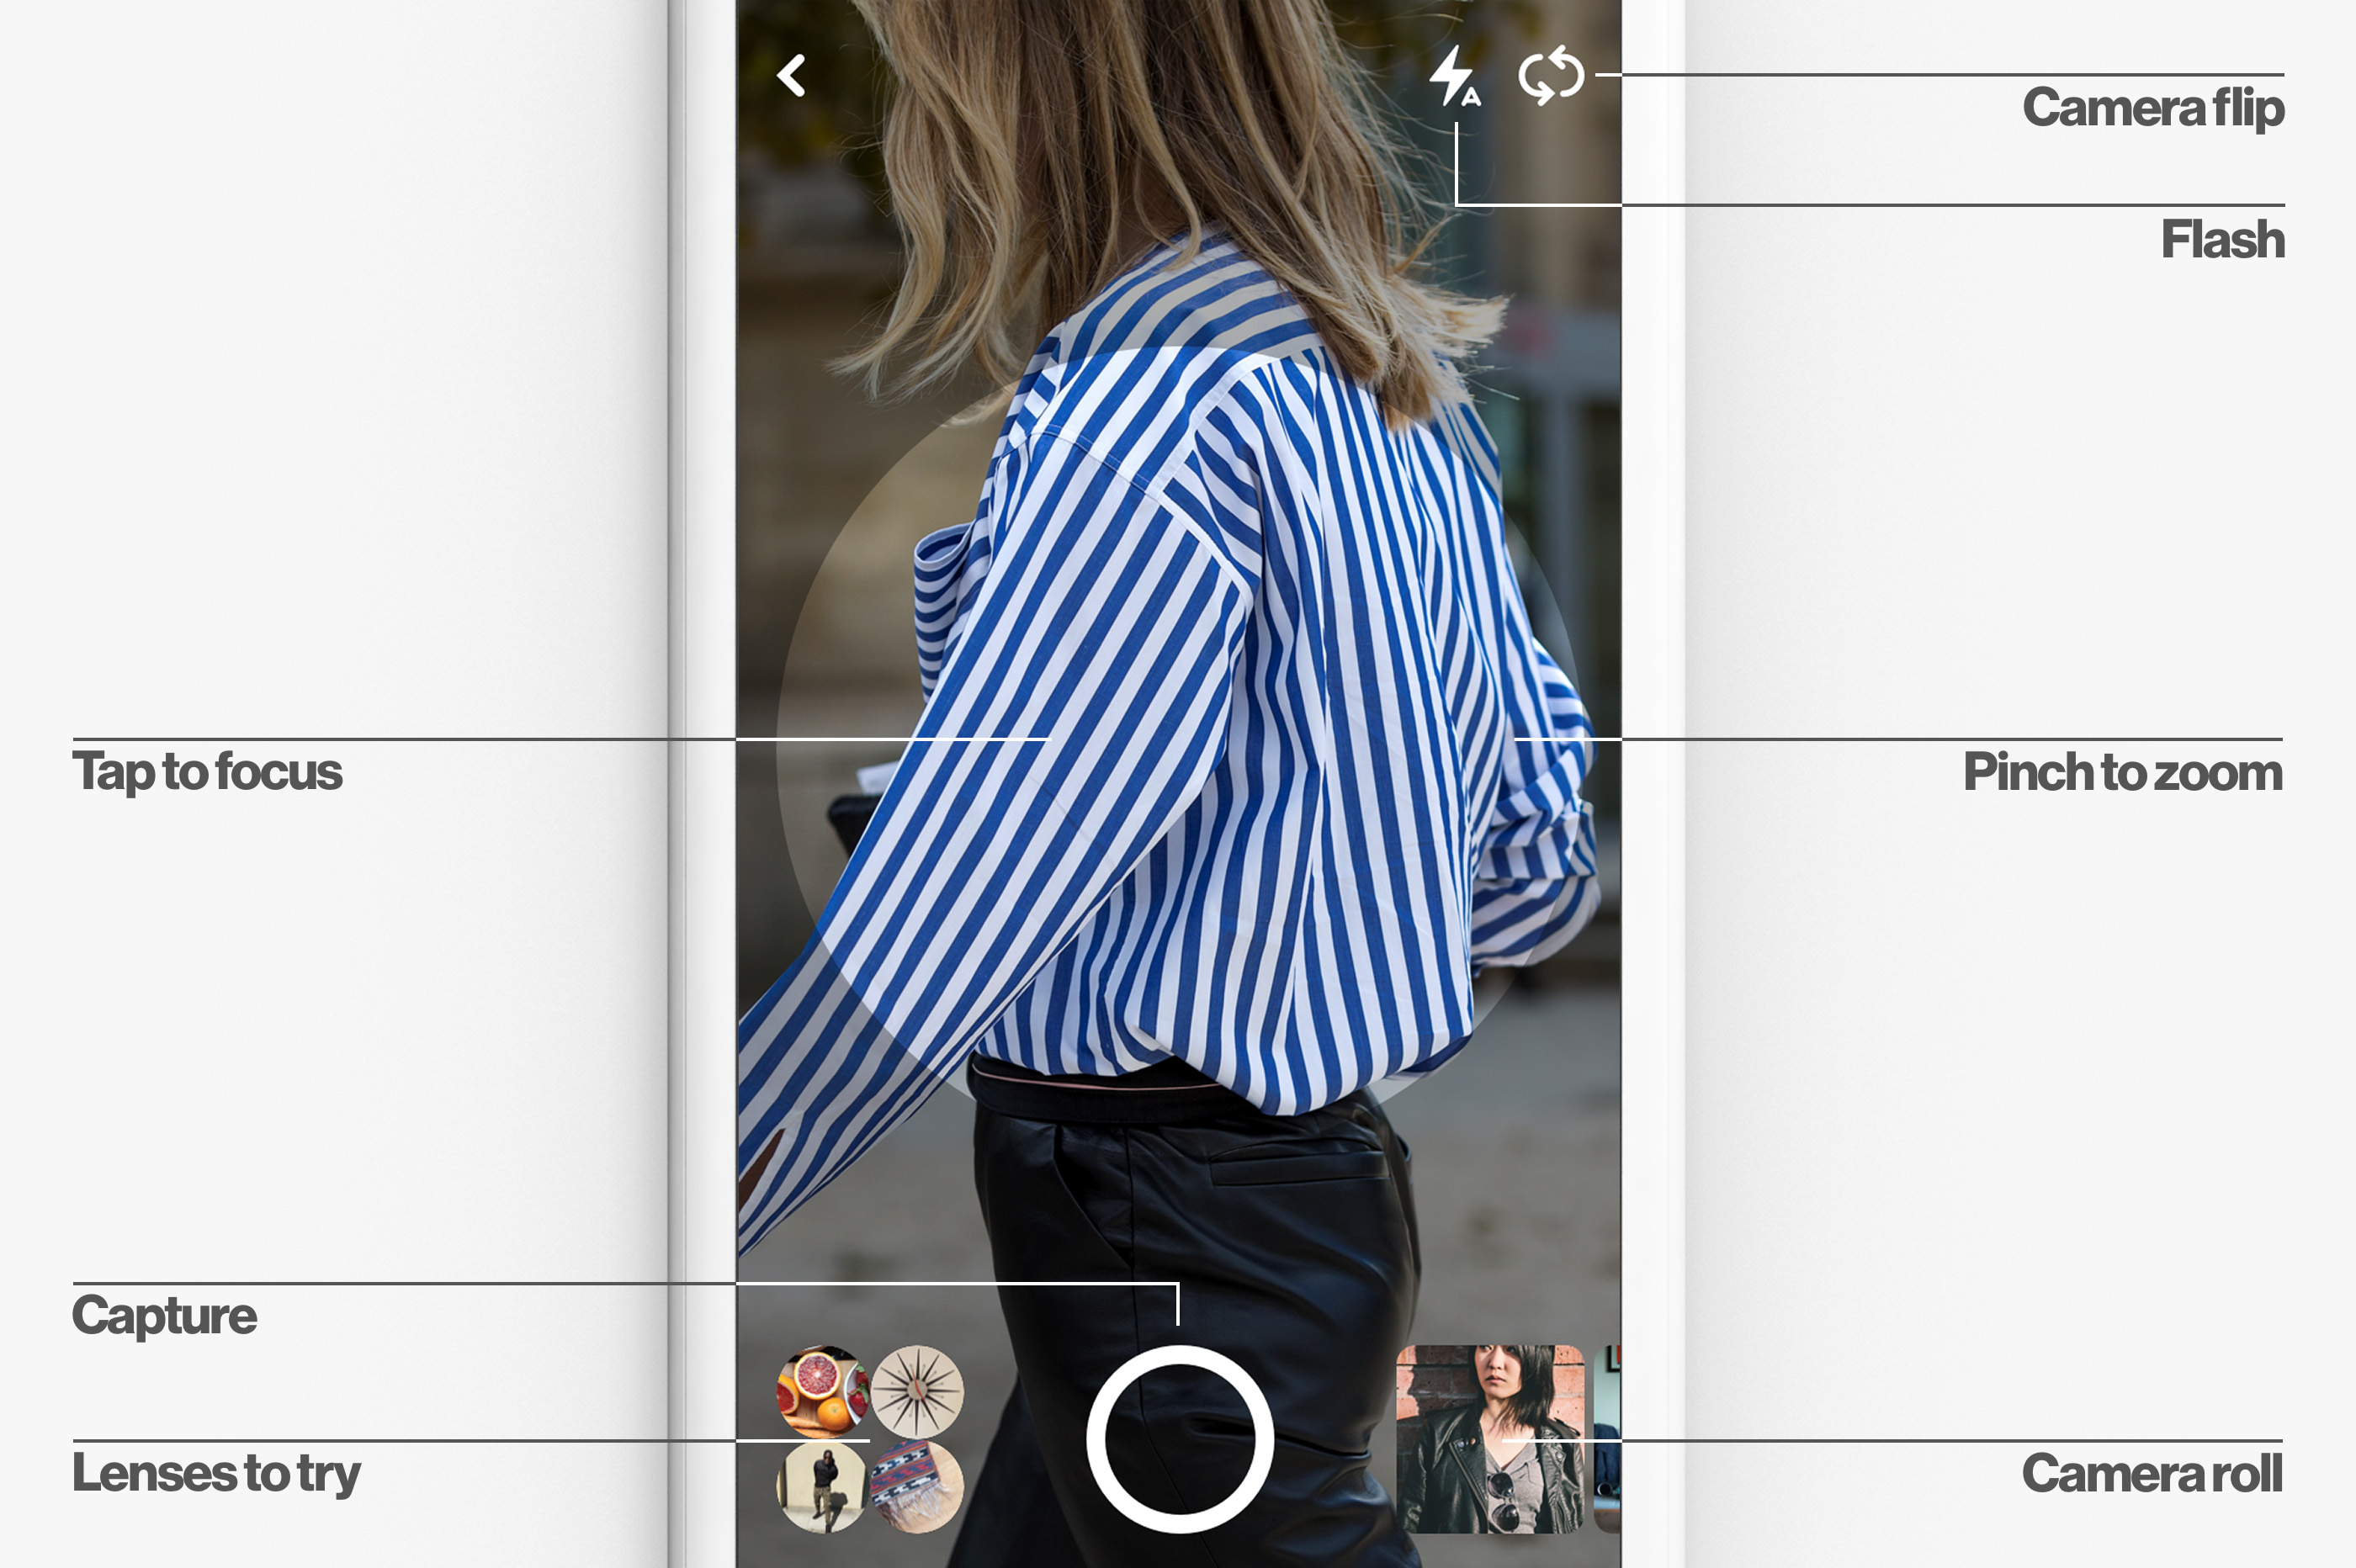 Target is adding Pinterest’s visual search tool to its app and website